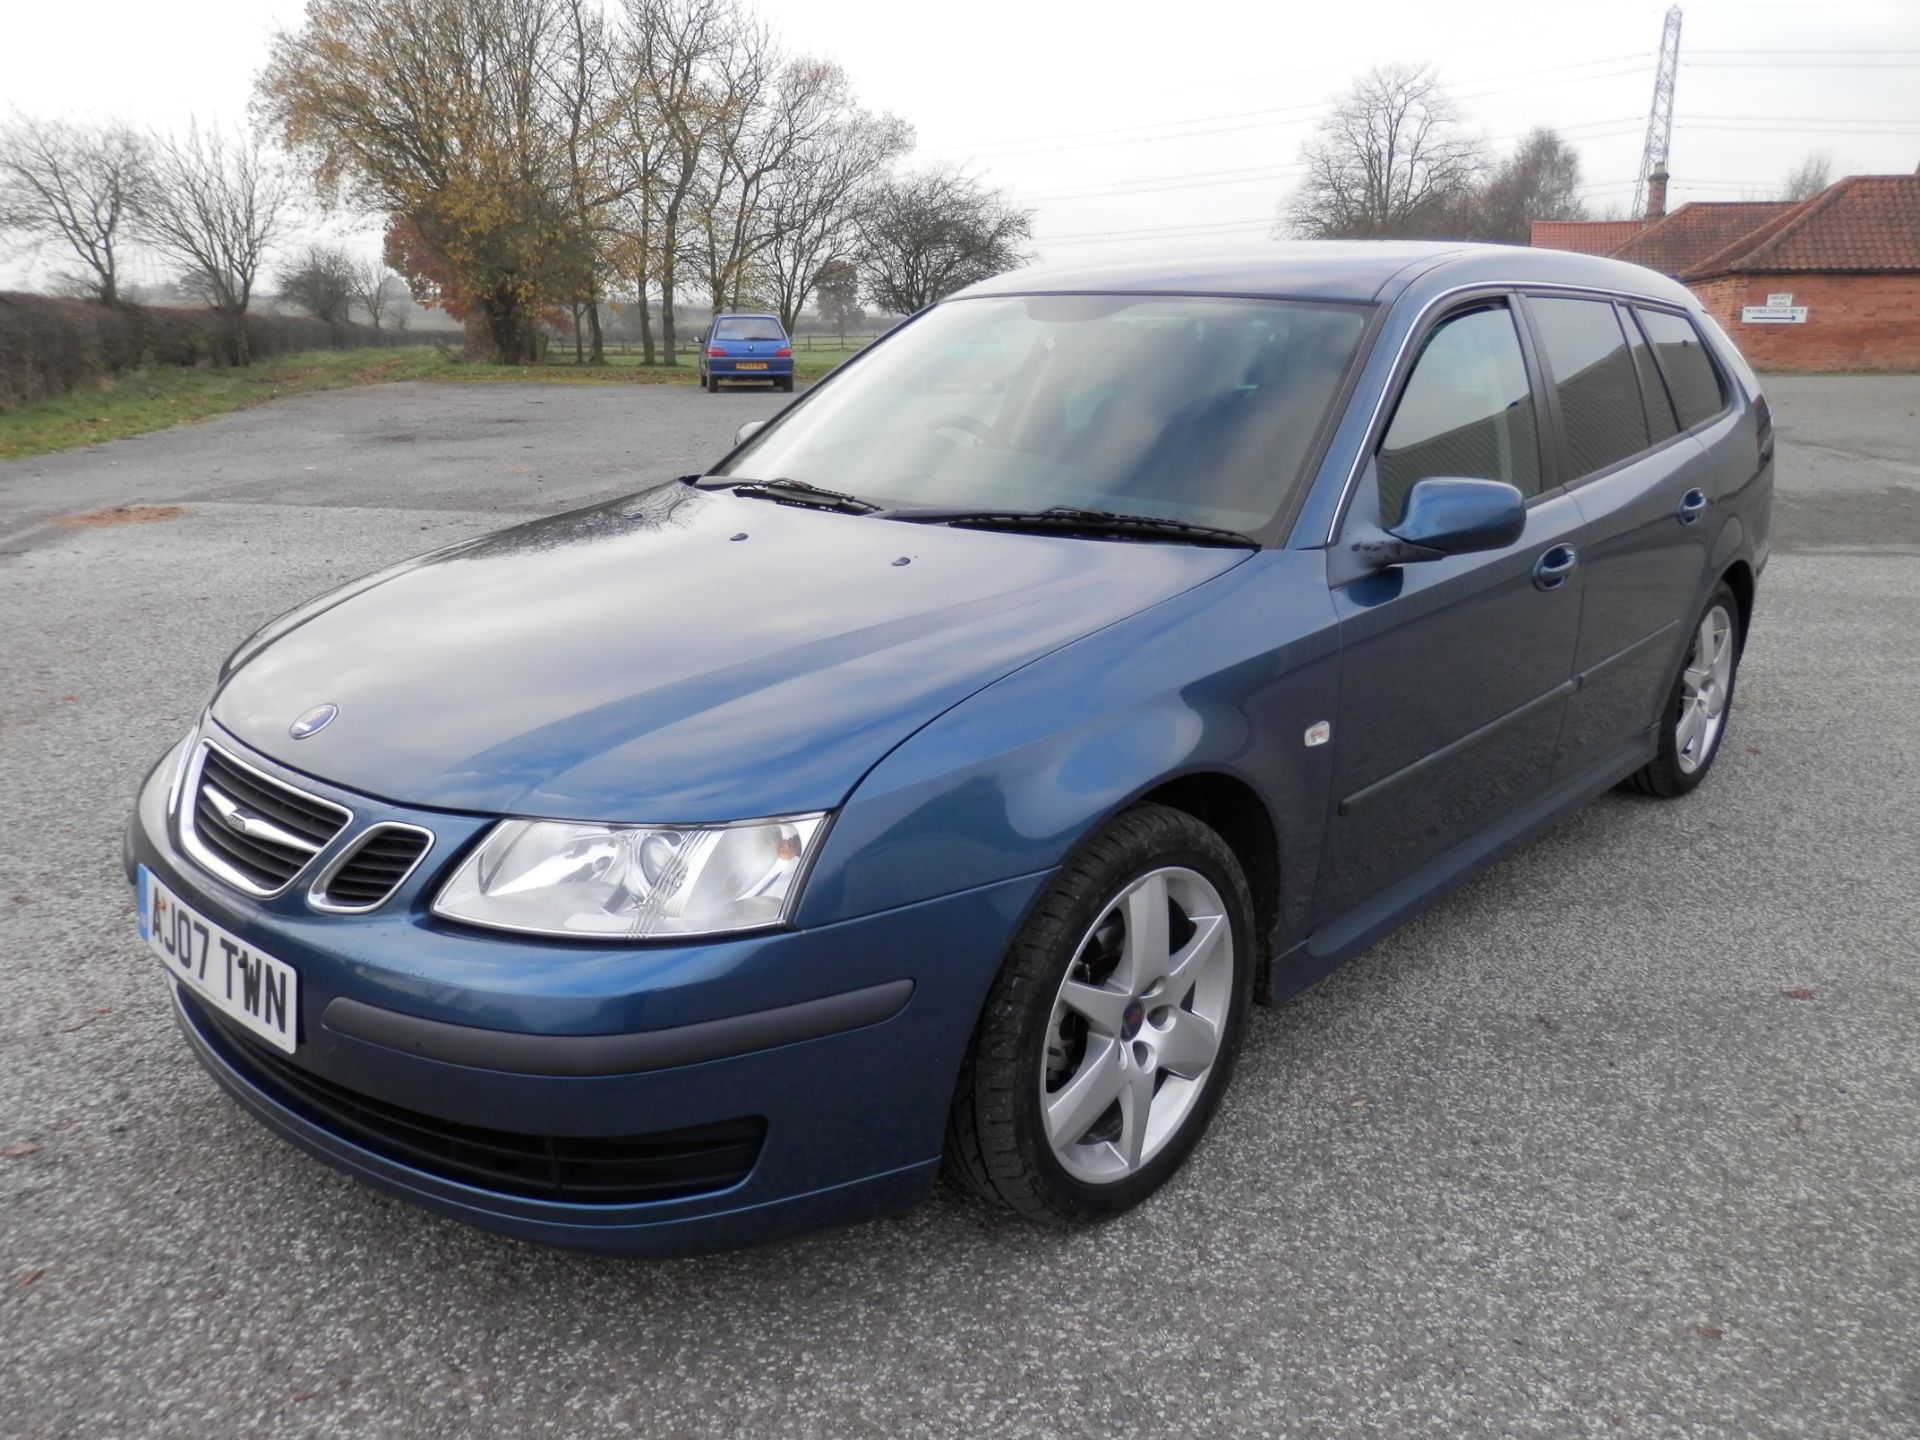 NOW WITH NO RESERVE !! 2007/07 SAAB 93 SPORTWAGON 1.9 TID 120 BHP, 6 SPEED MANUAL, MOT MARCH 2007. - Image 10 of 25